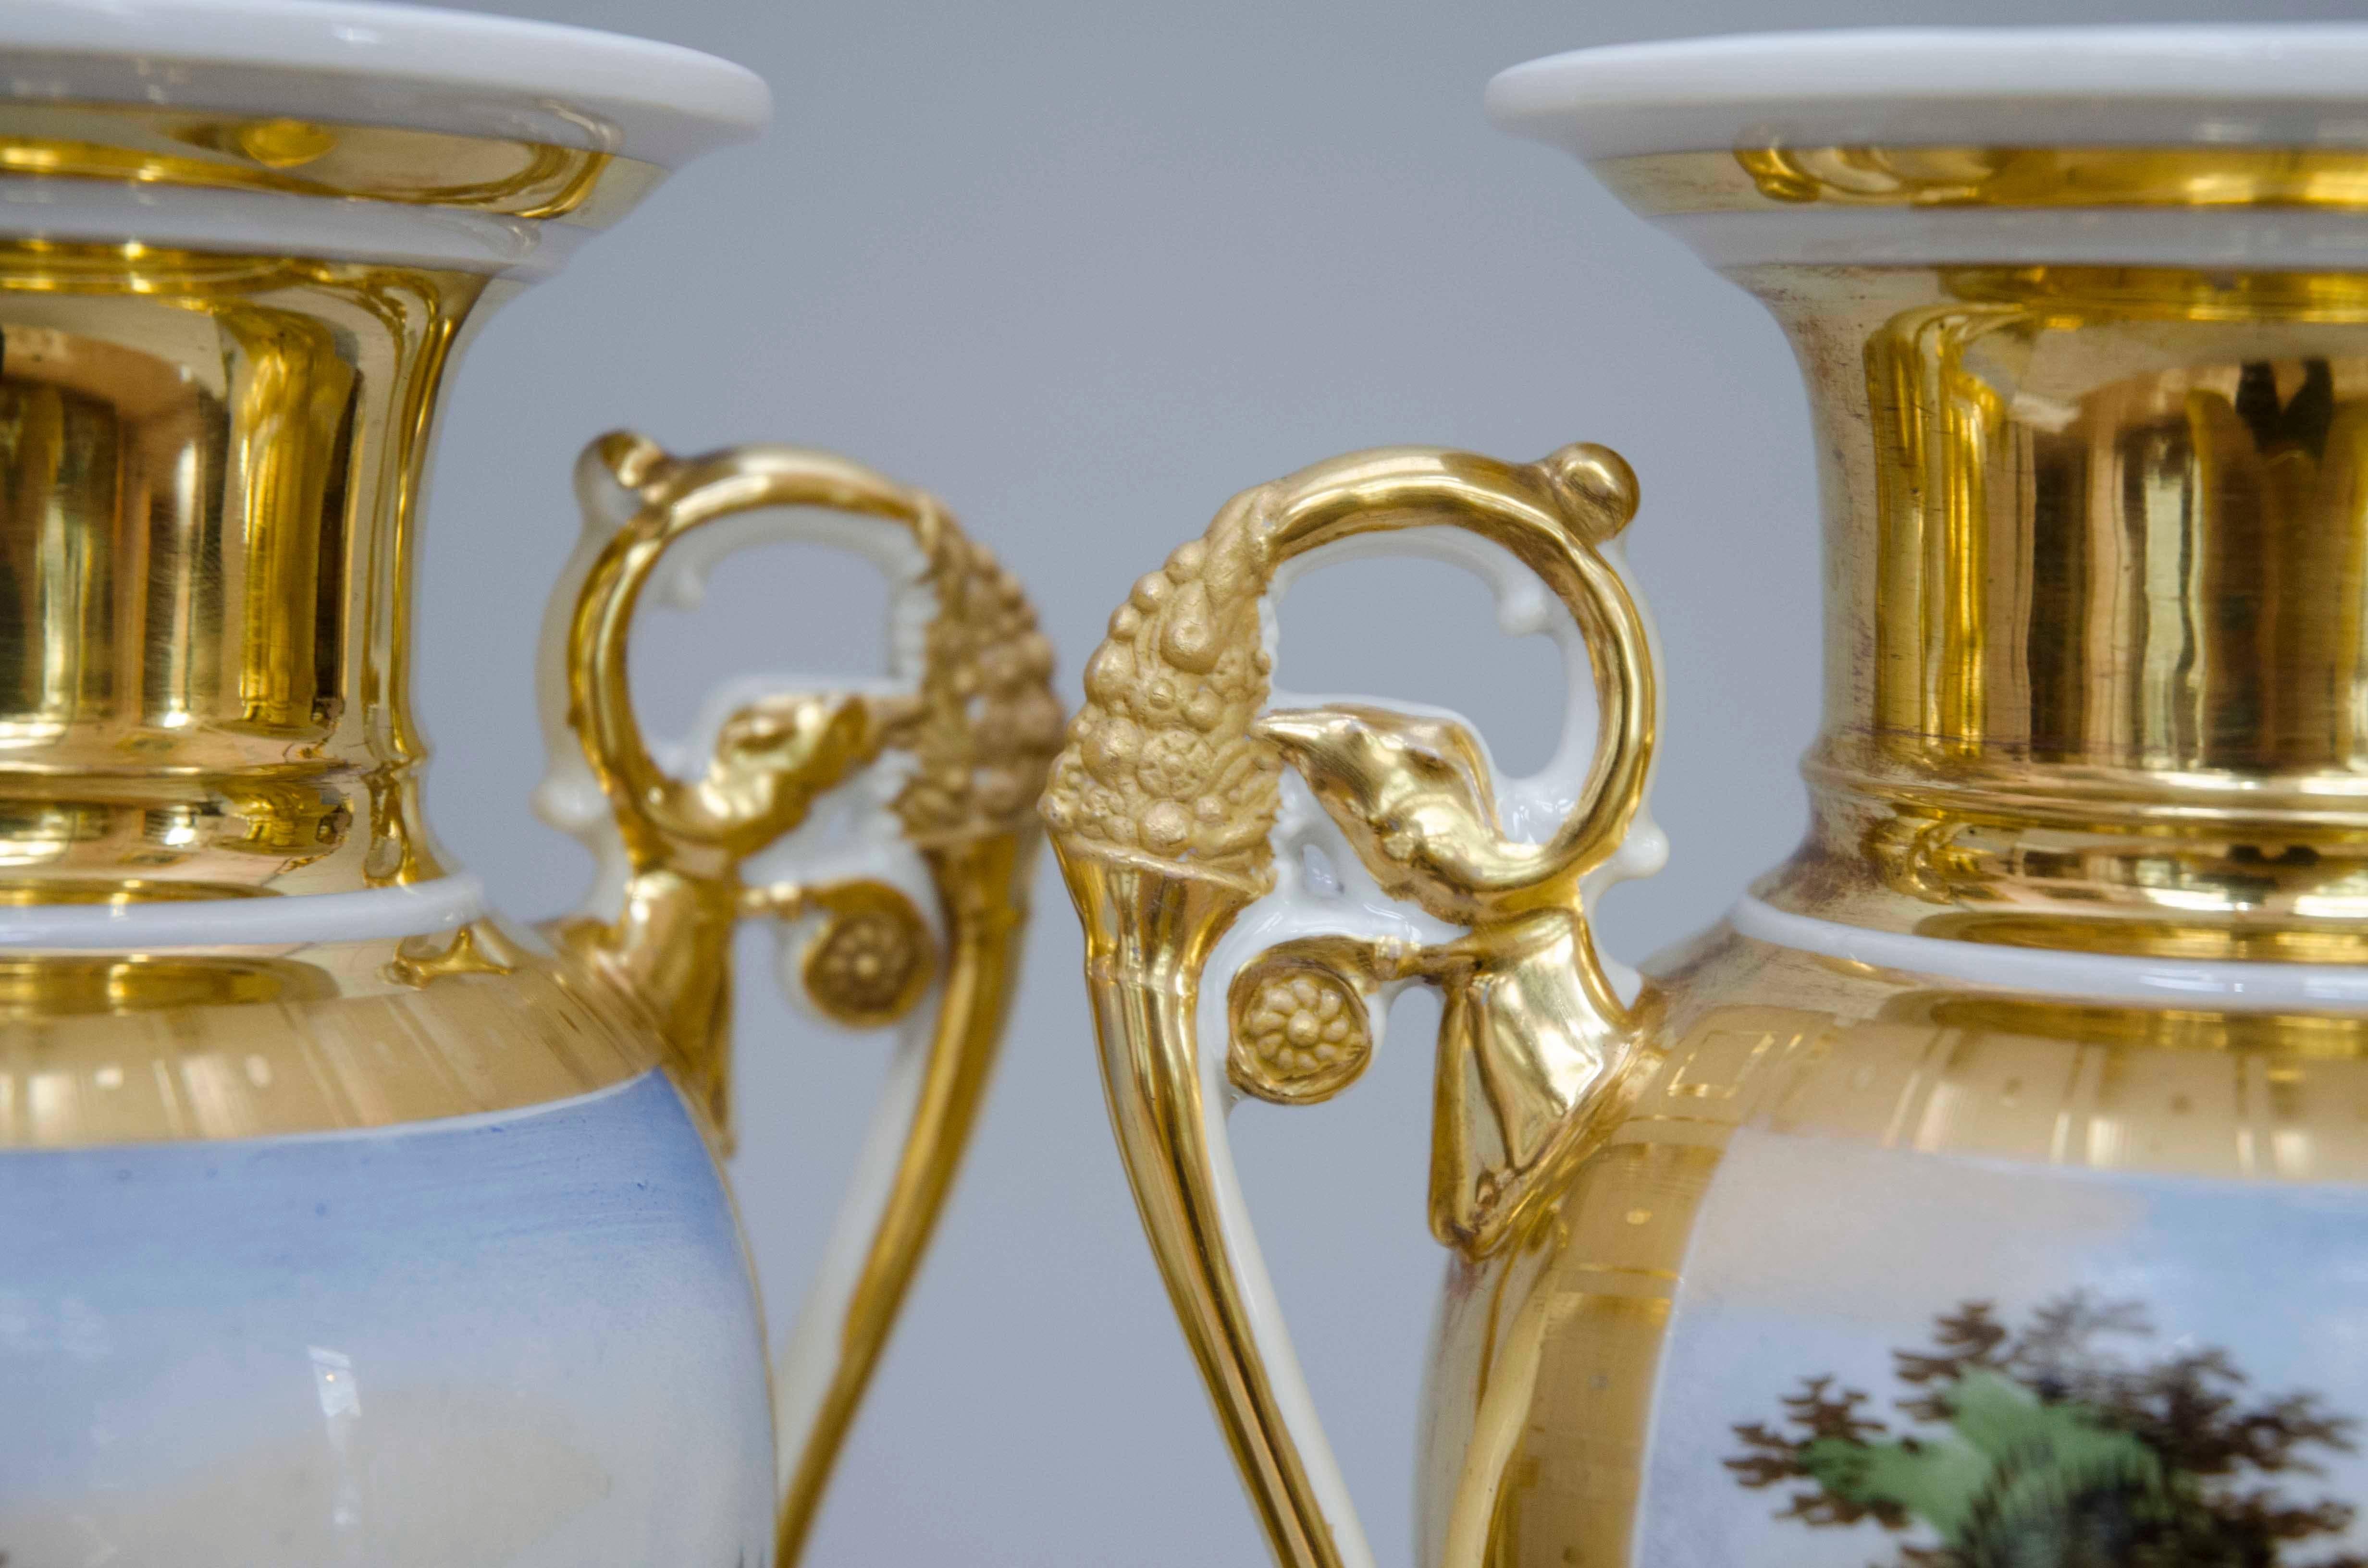 Belgian 19th Century Squared Based Egg Shaped Vases with Italian Landscapes, Brussels For Sale